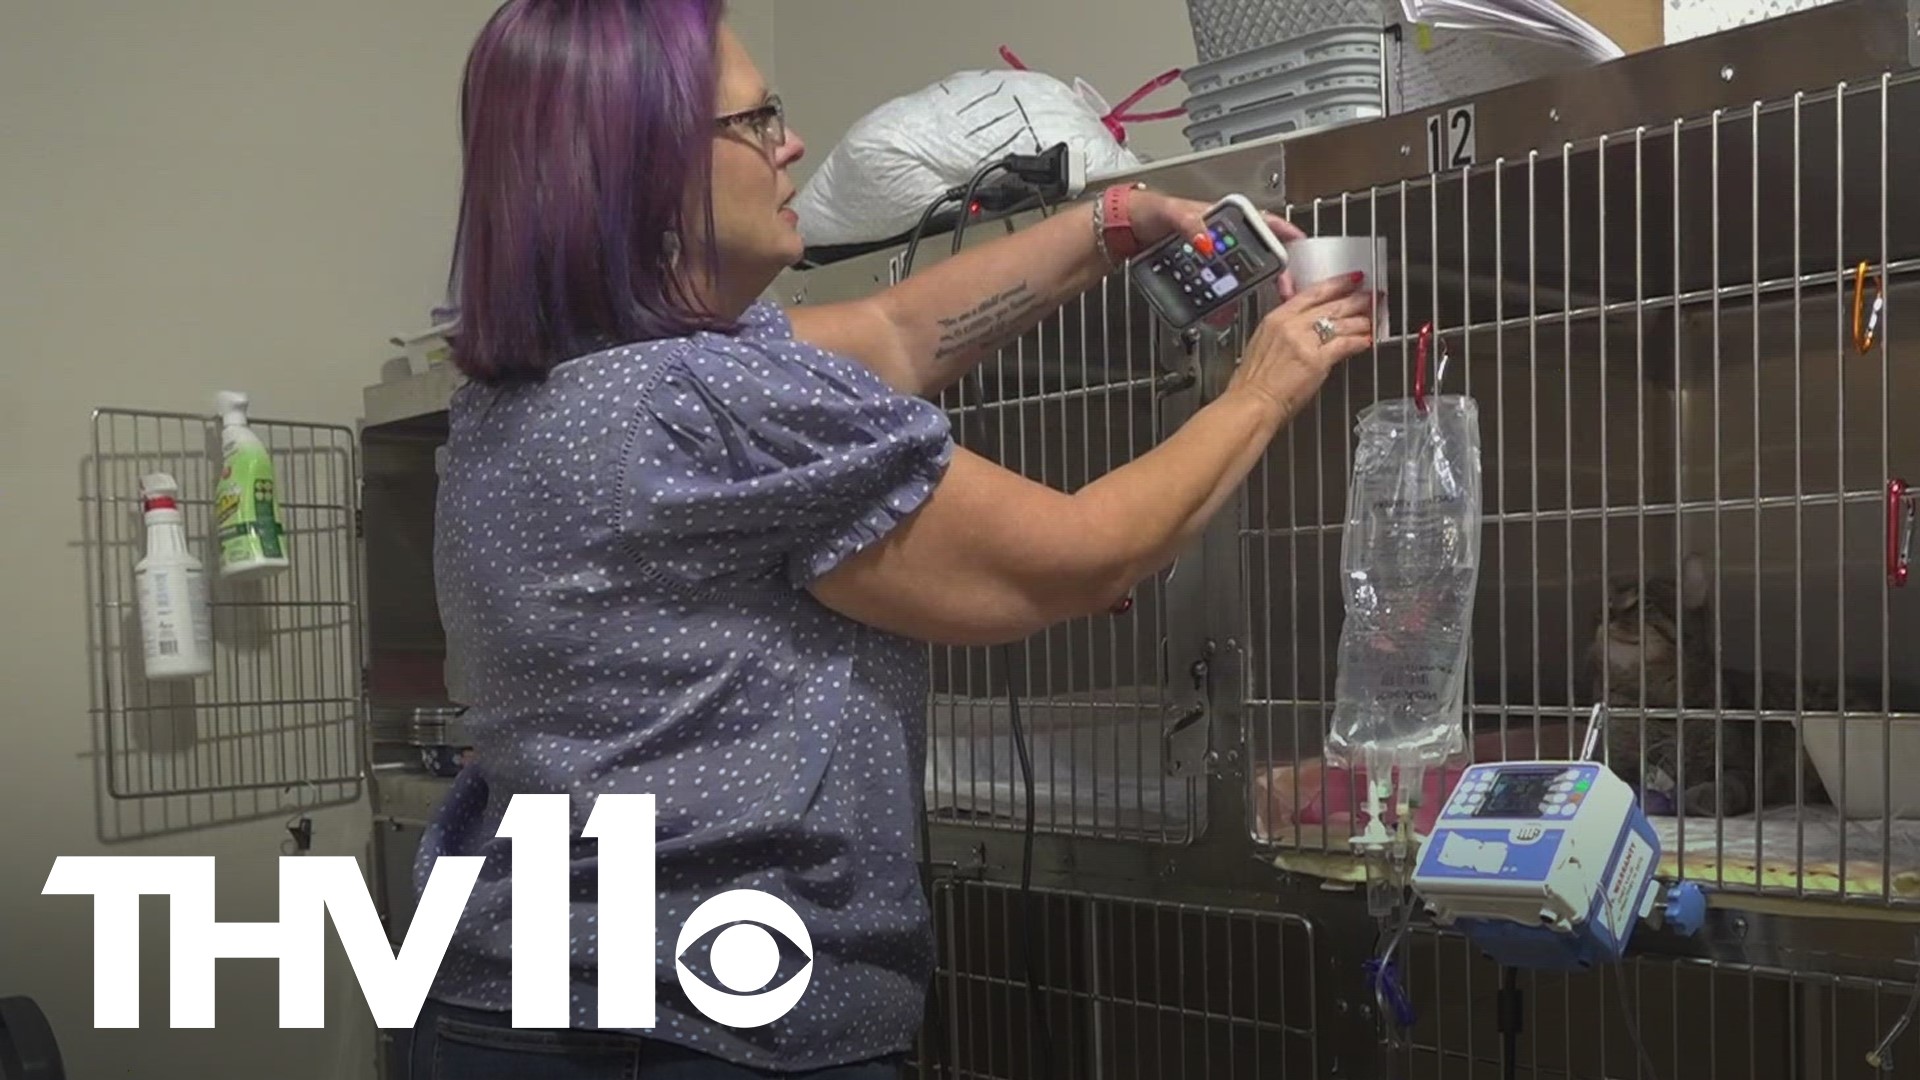 Vet clinics are still struggling to make ends meet as a veterinarian shortage continues to be a challenge this year.